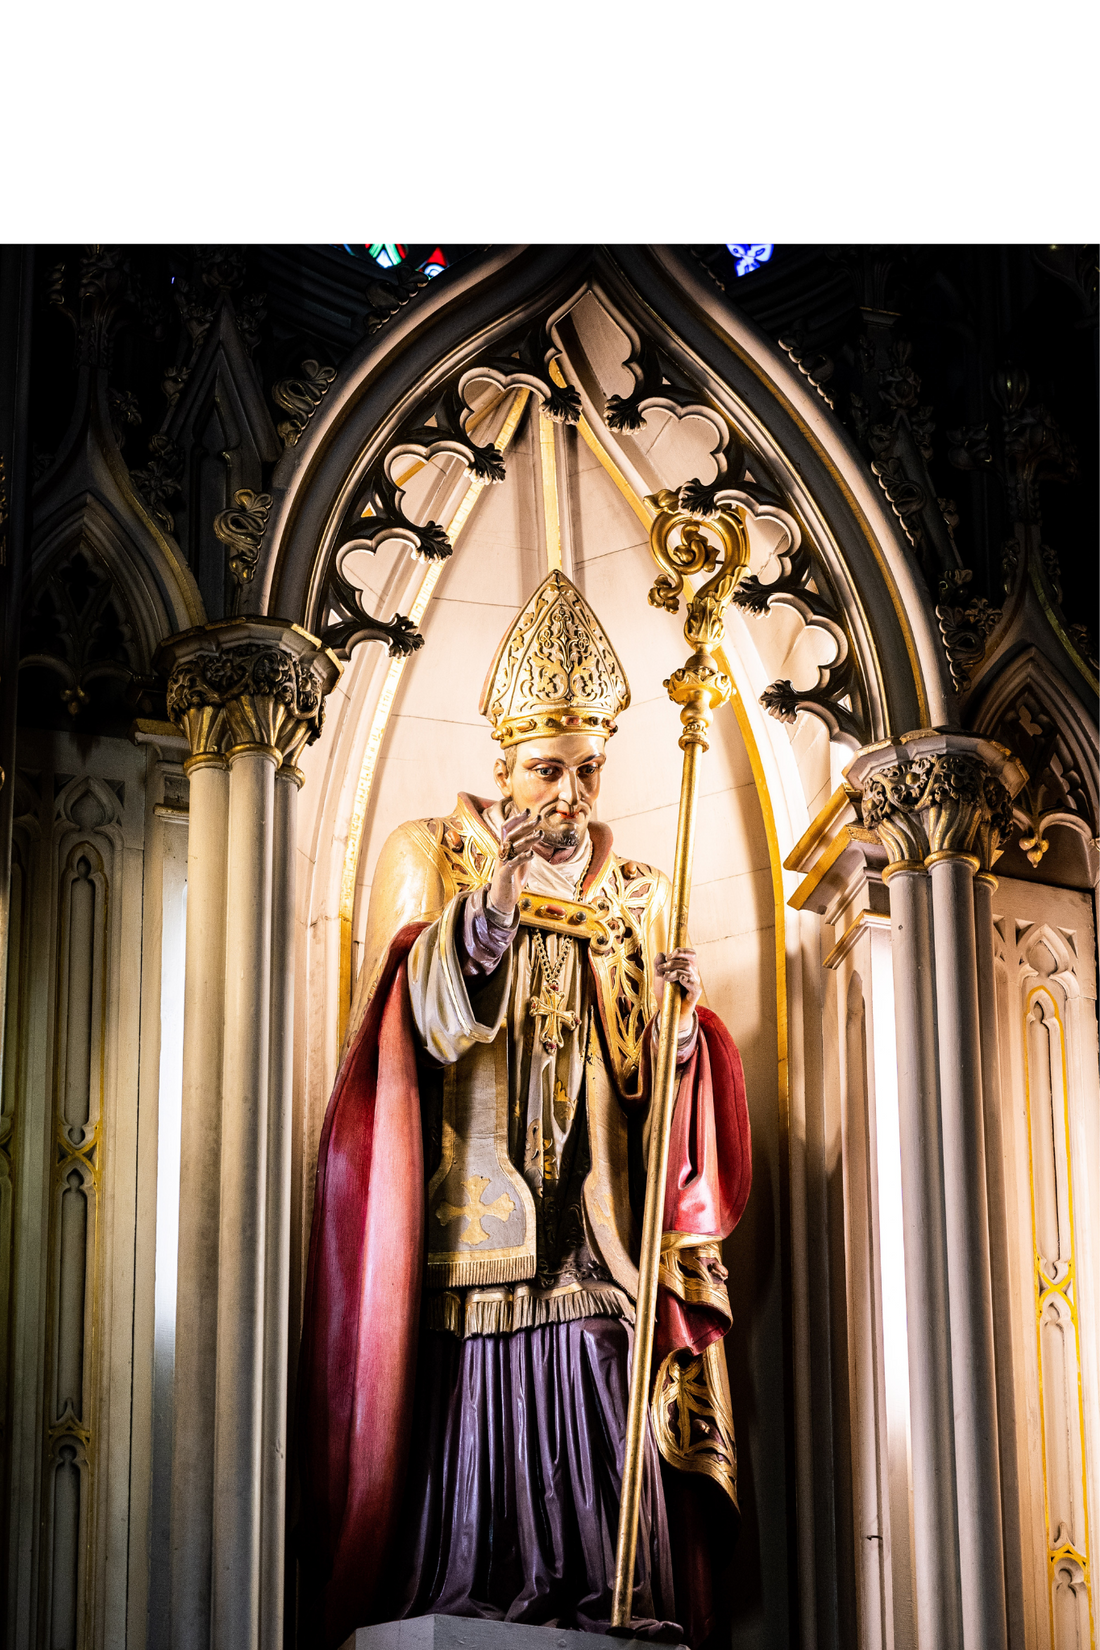 Choosing a Catholic Statue: 3 Things to Consider